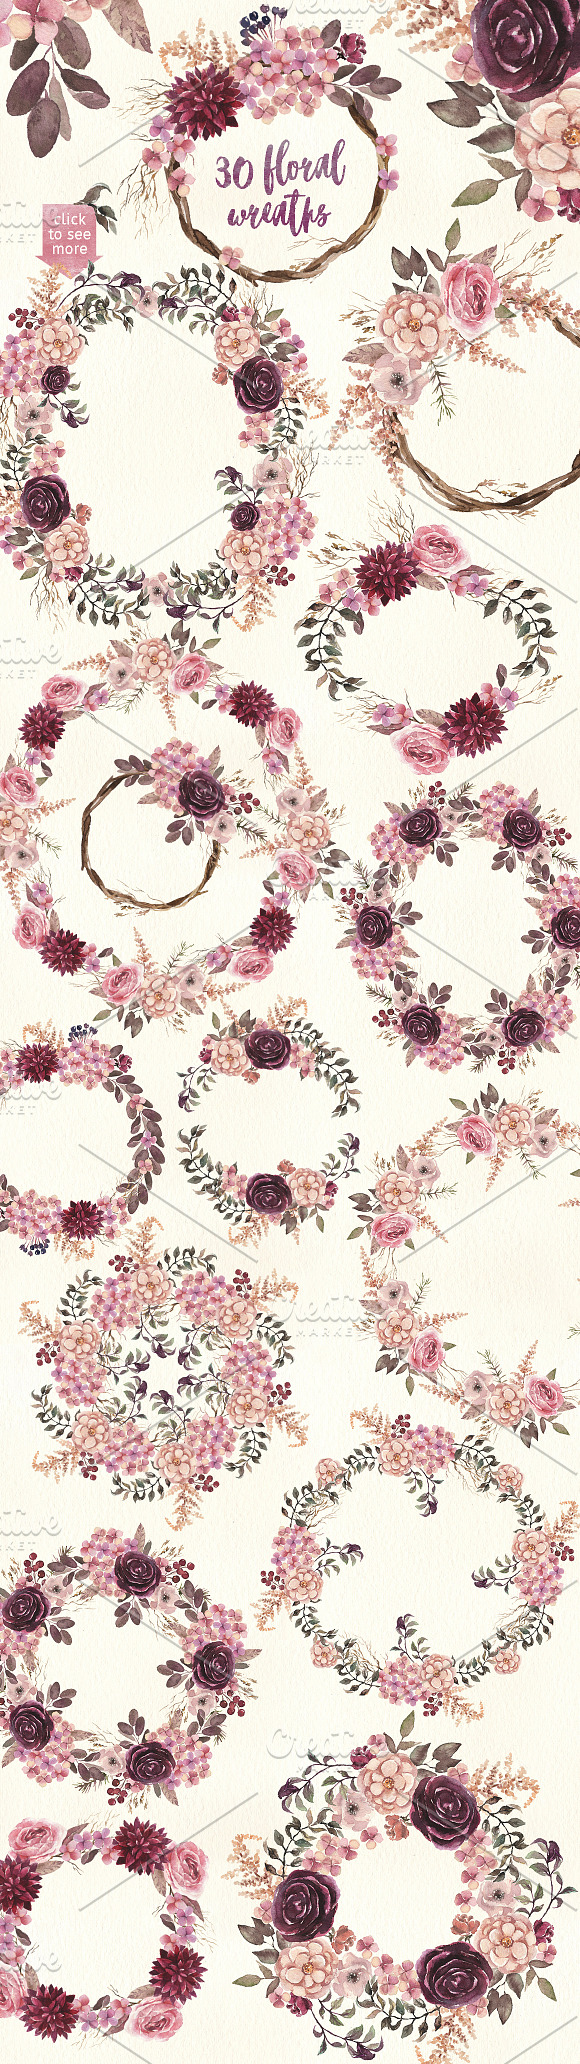 70%OFF Burgundy & Cream Floral Pack in Illustrations - product preview 2